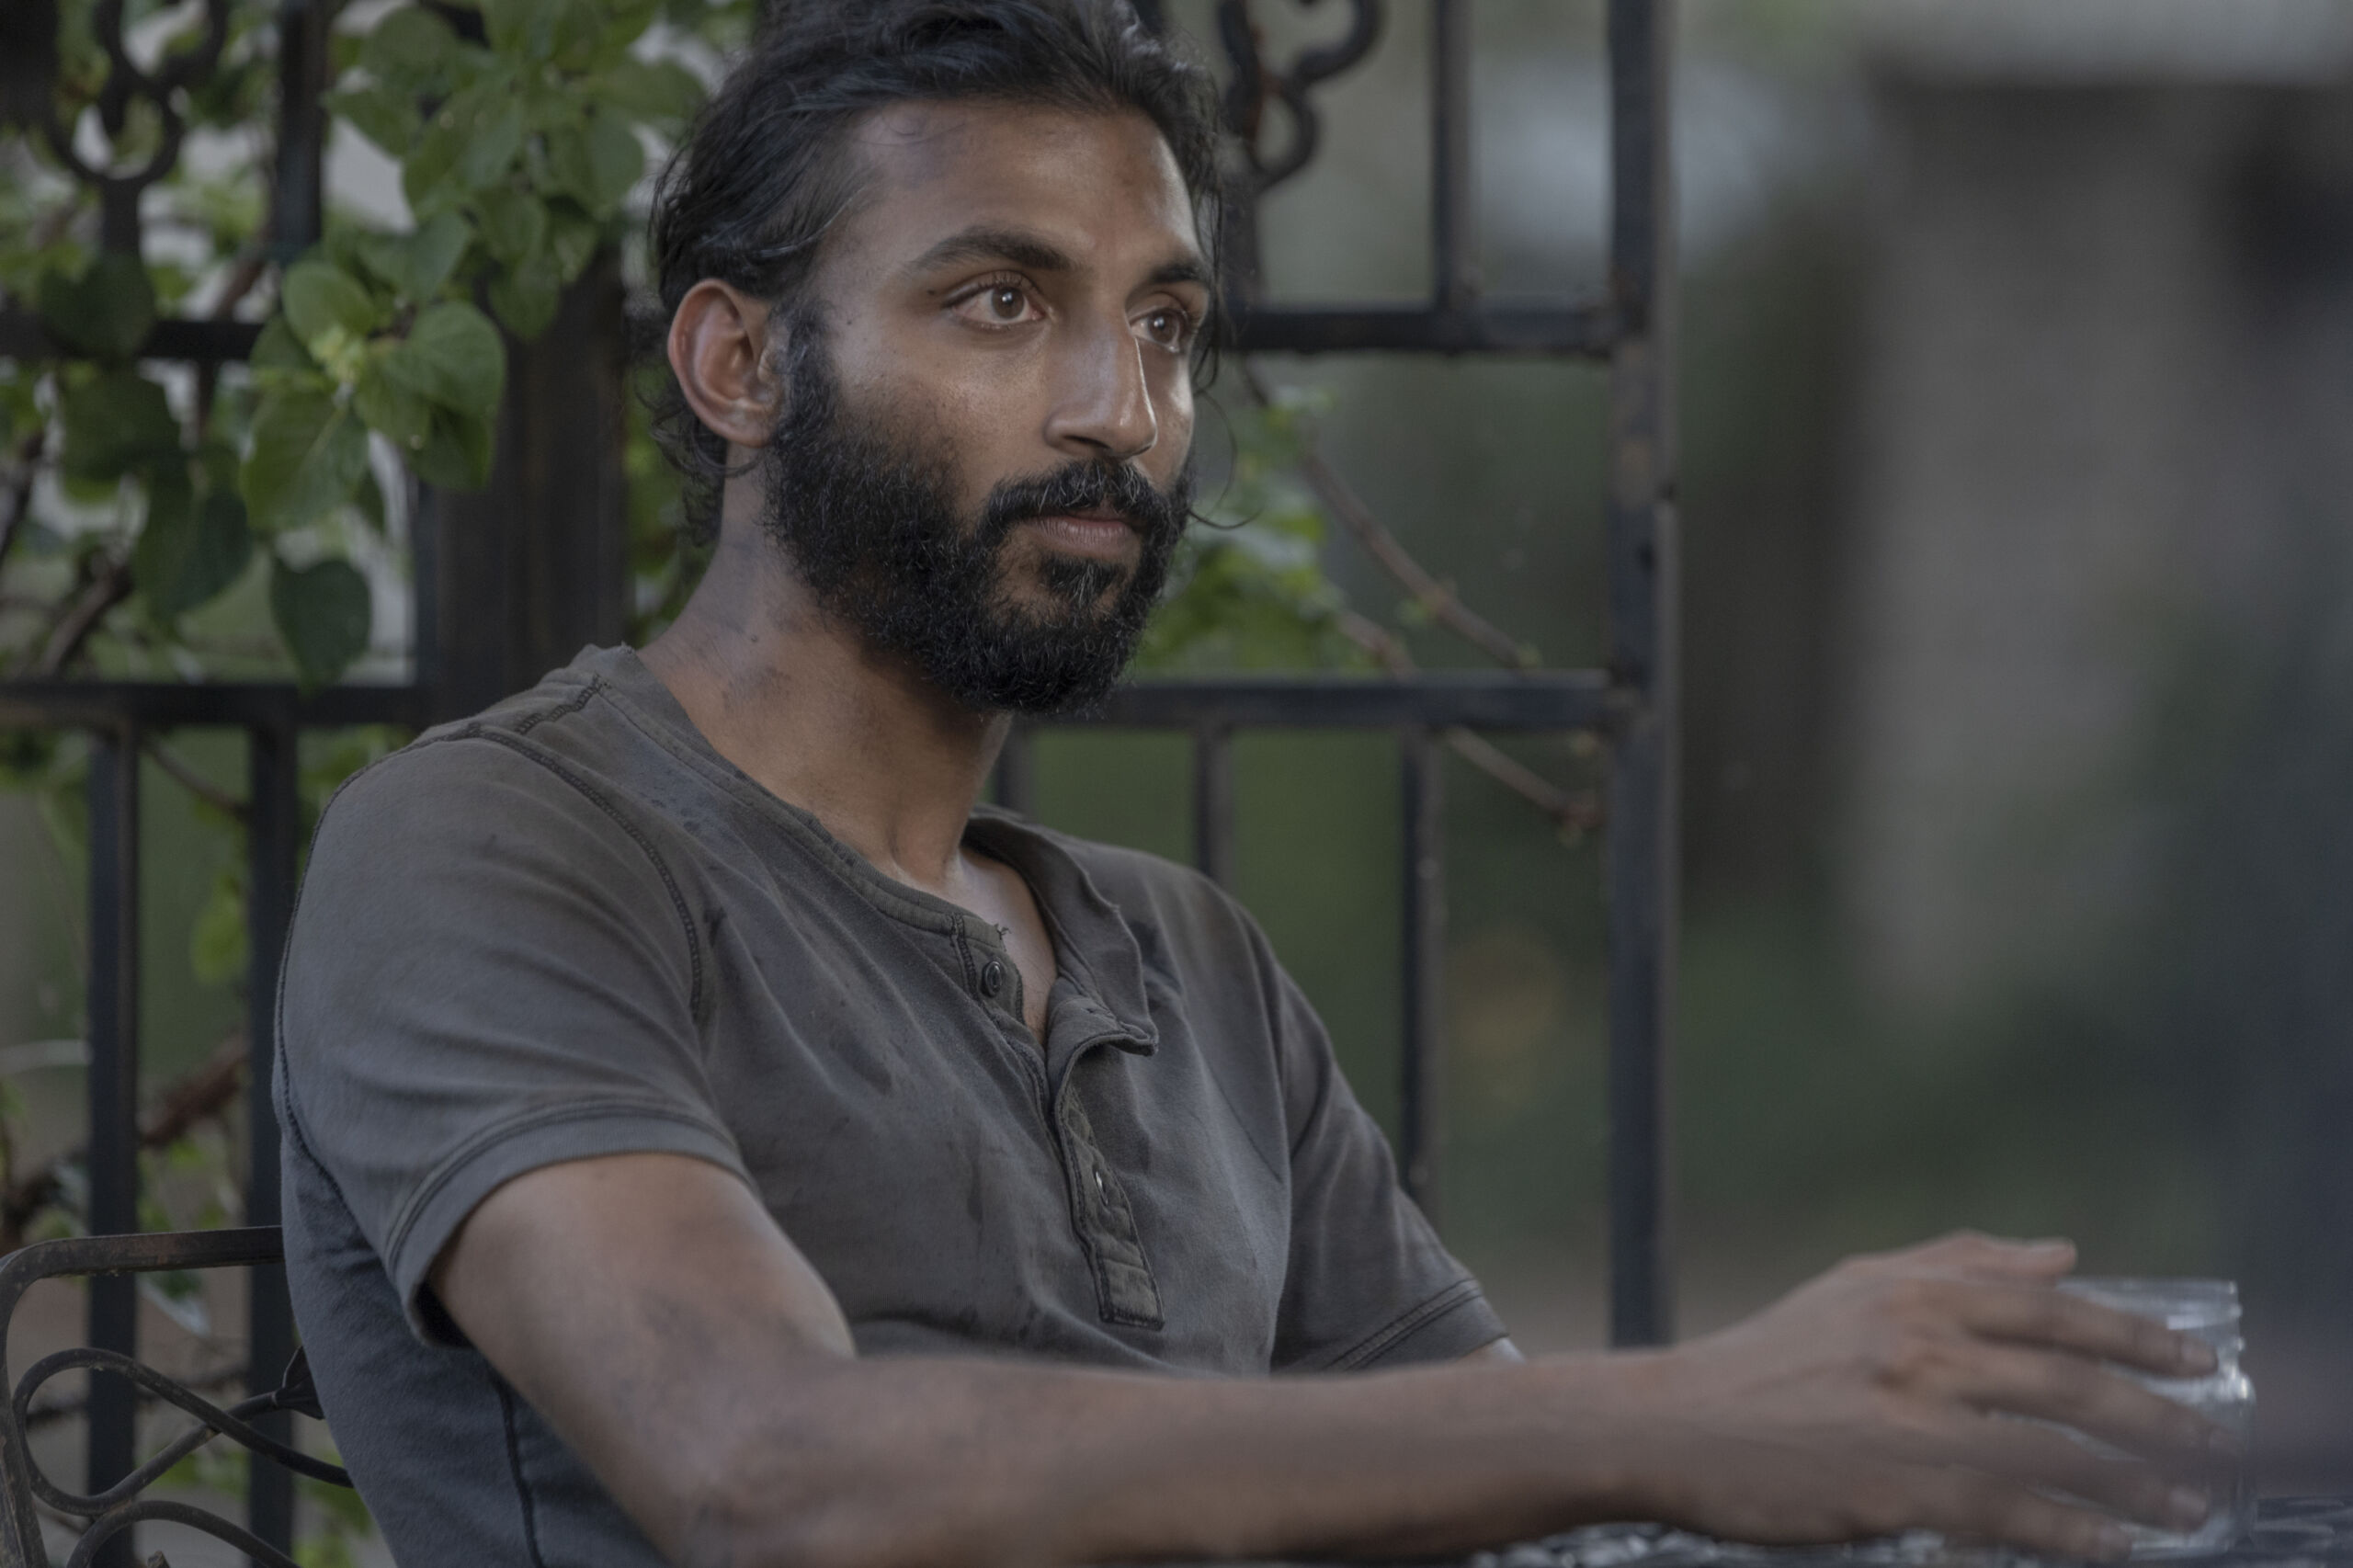 Which actor from The Walking Dead is starring Apple TV+ Silo?